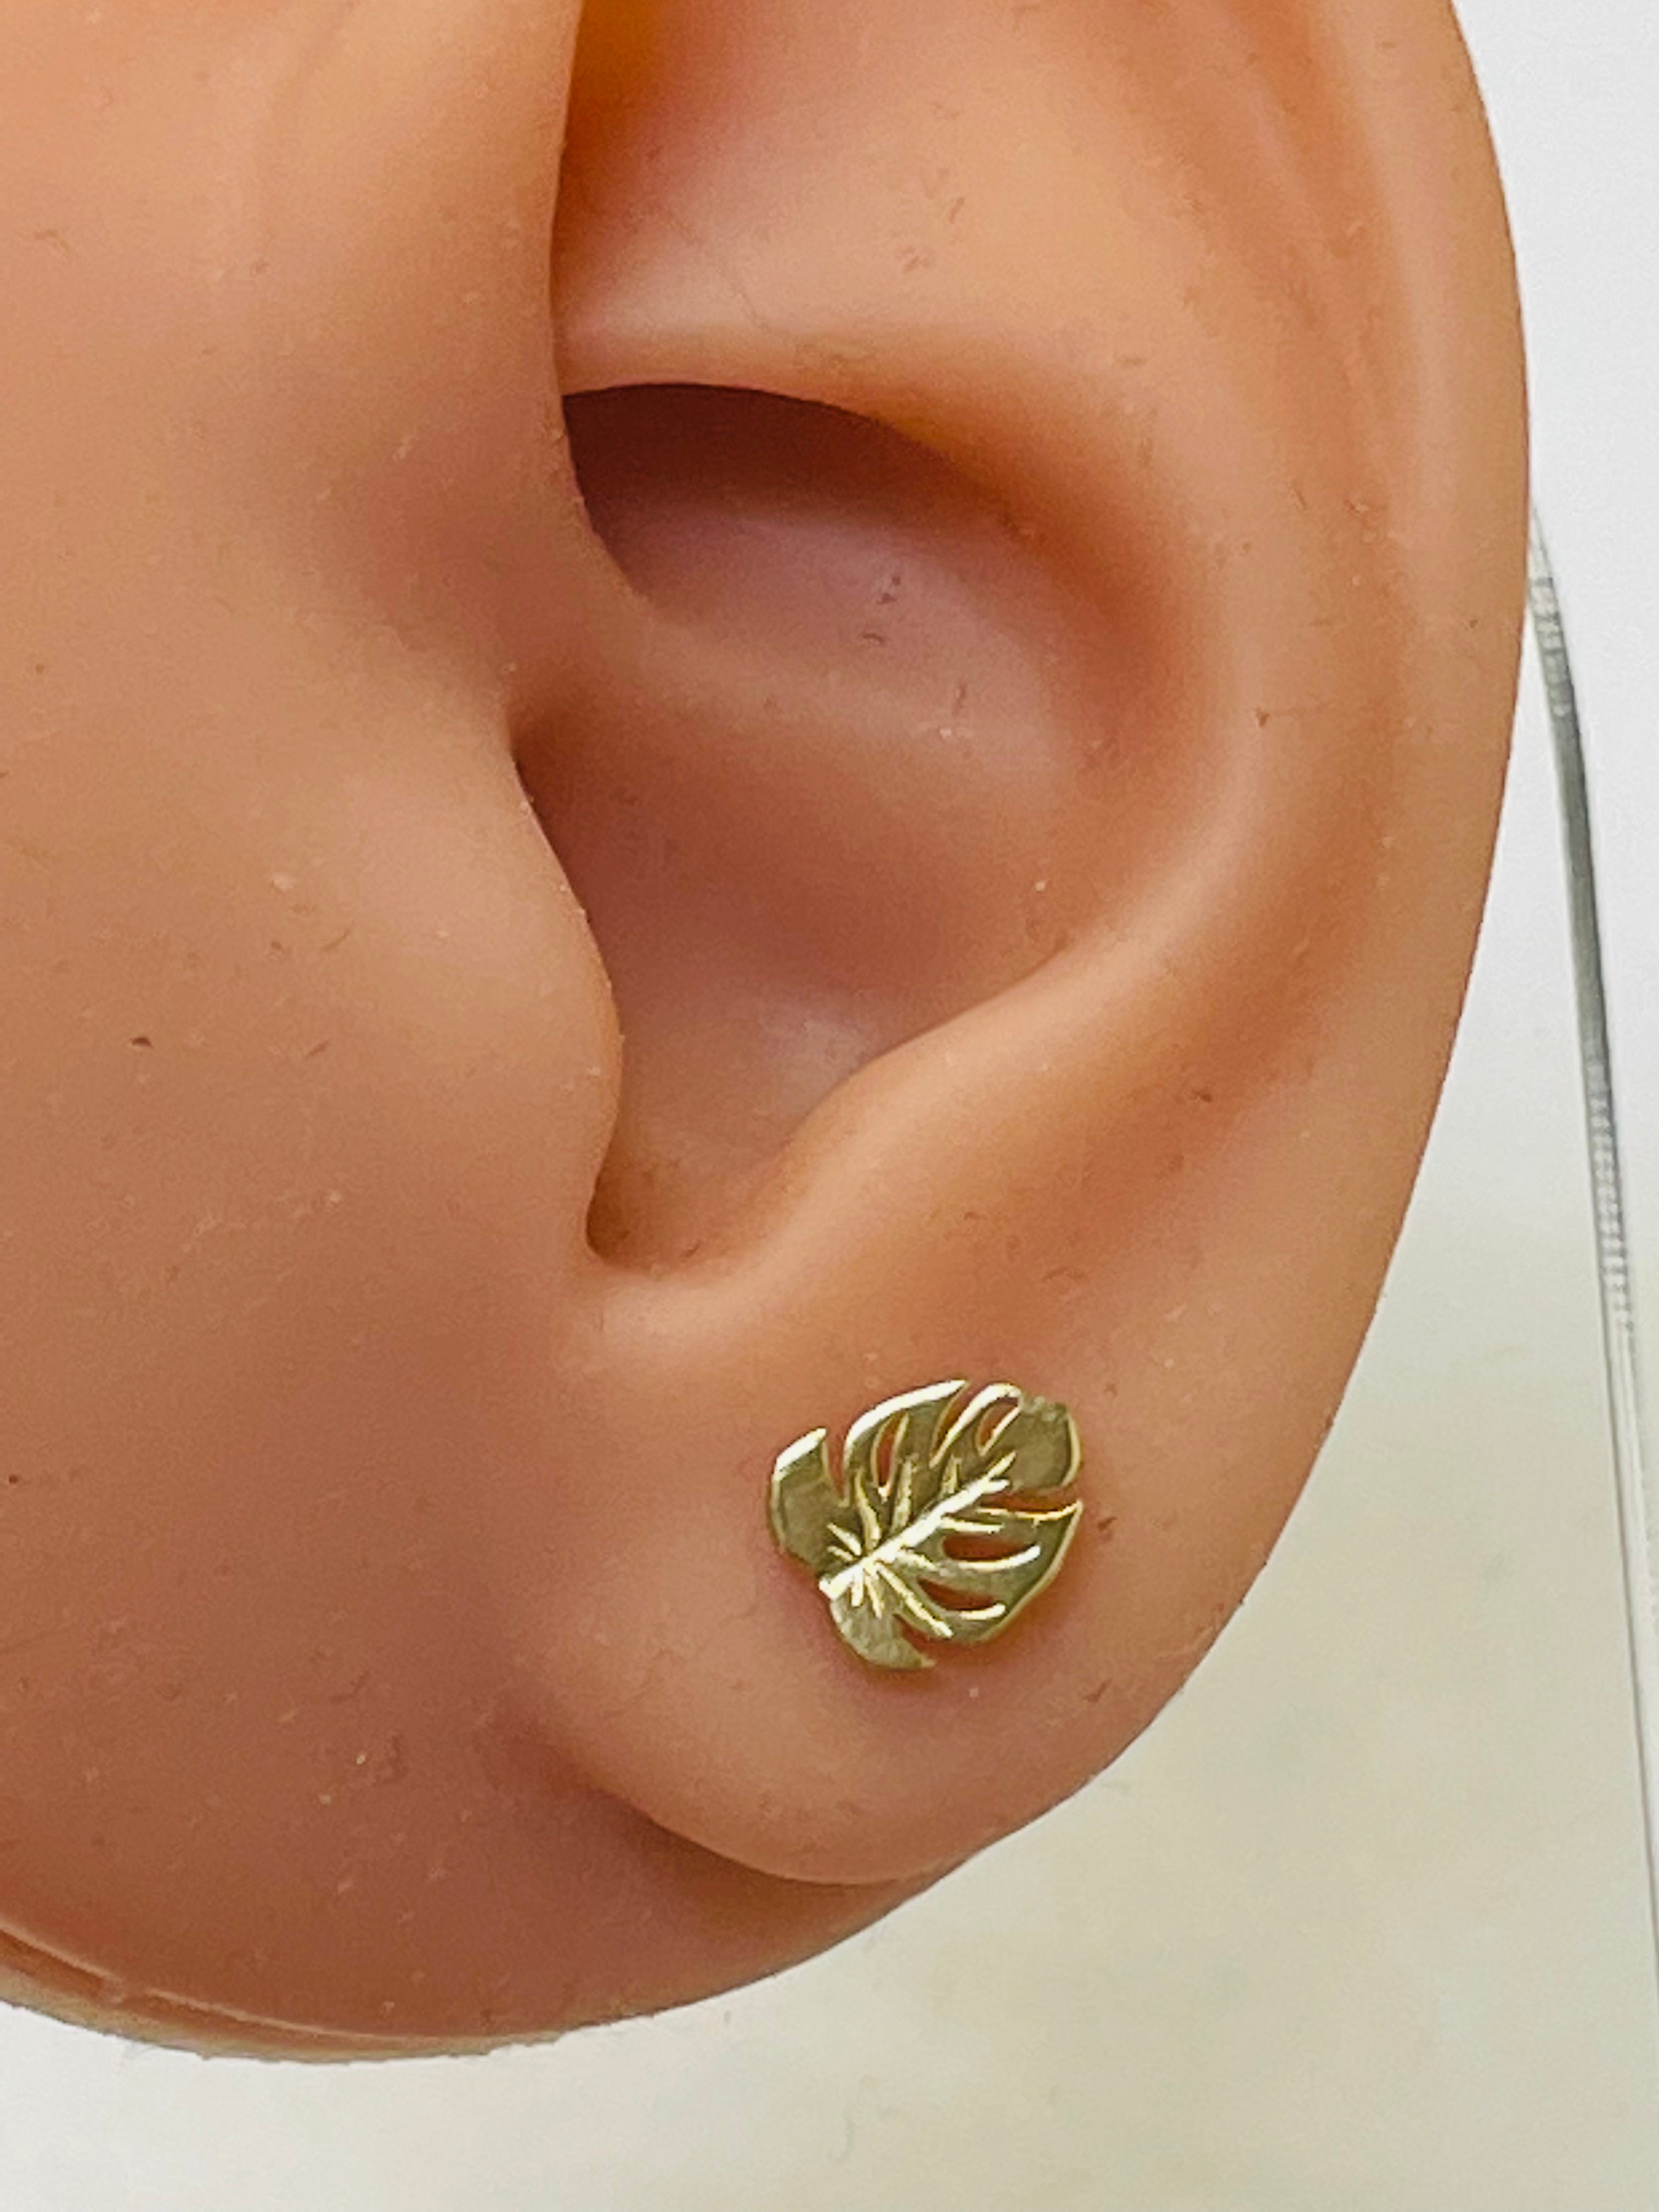 Tropical Palm Leaf Earring Studs 14K Yellow Gold  8x8mm